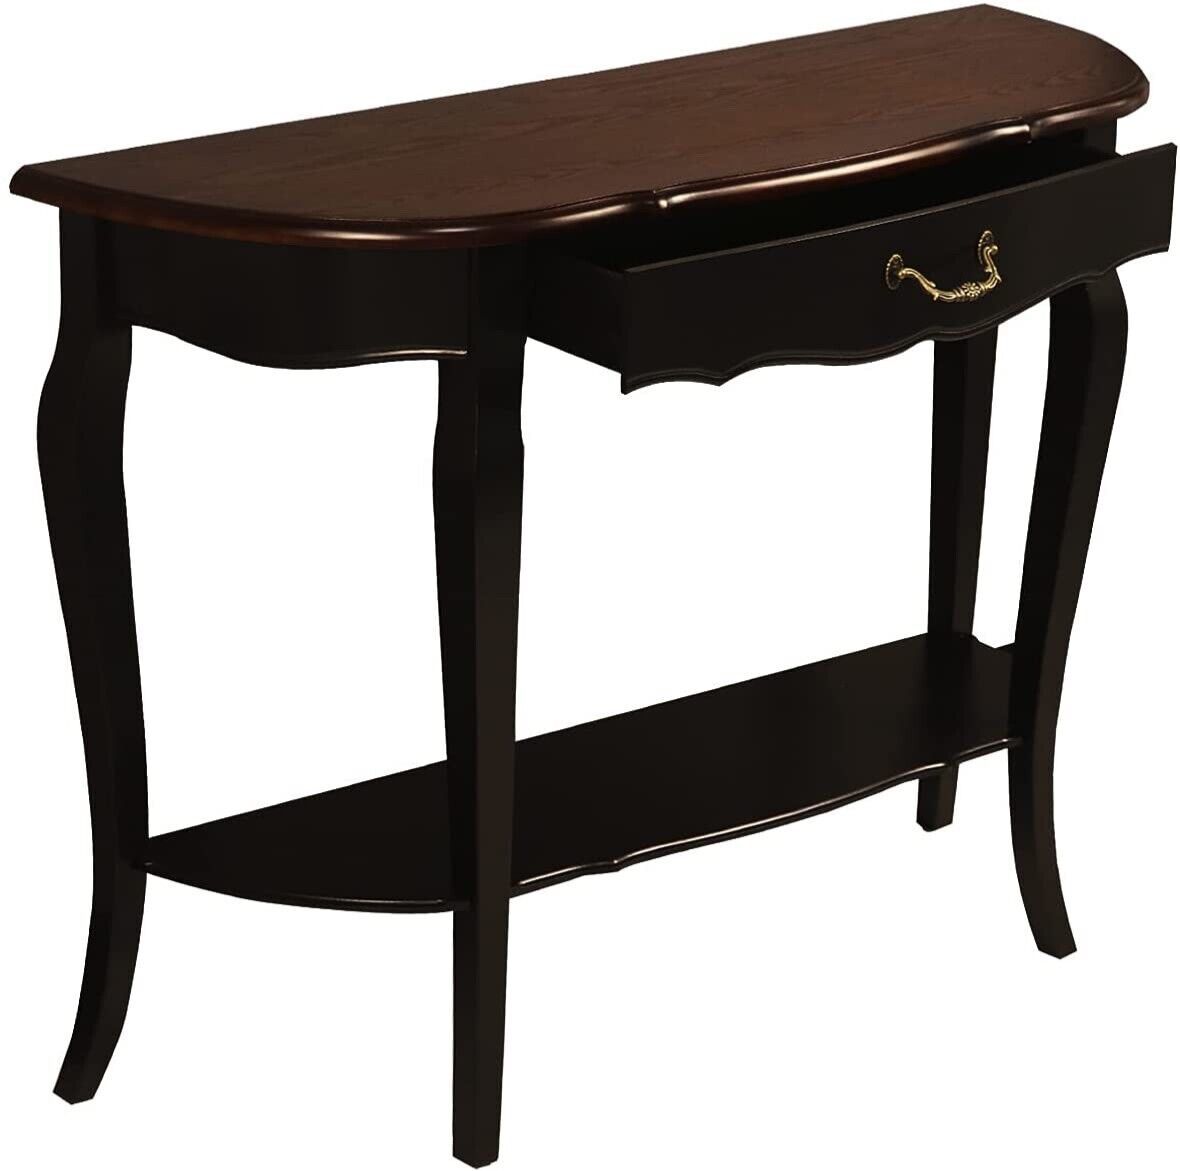 Primary image for Wood Console Sofa Entry Table with Drawer & Shelf for Living Room Hallway Foyer